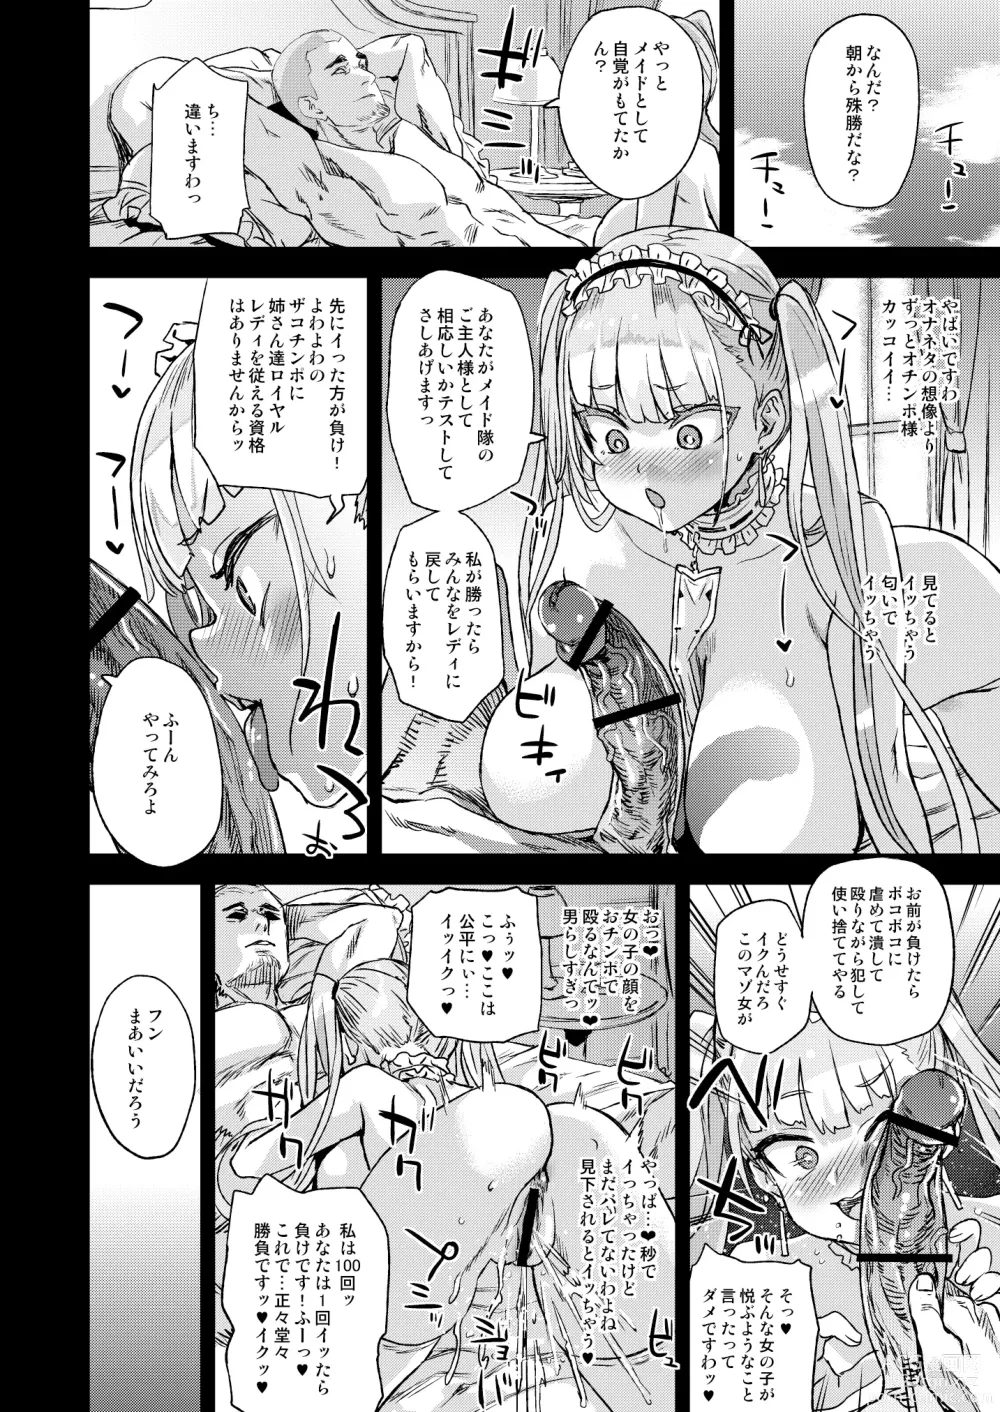 Page 18 of doujinshi Lady falls into a maid